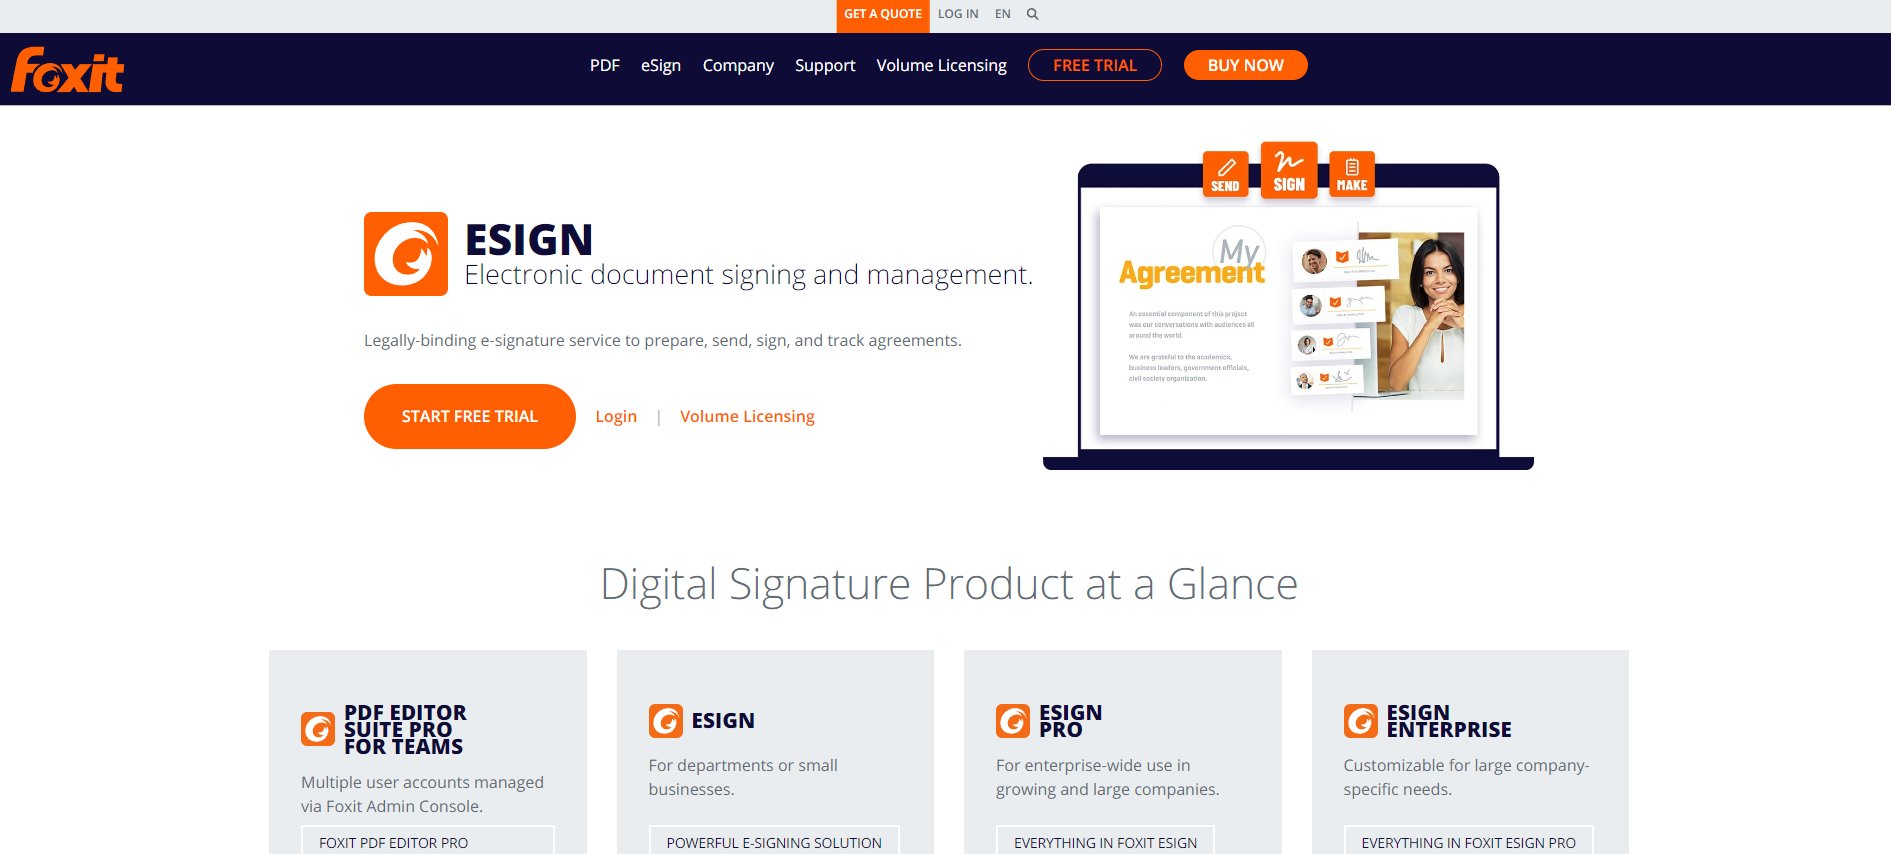 Top 5 HIPAA-Compliant Electronic Signature Software